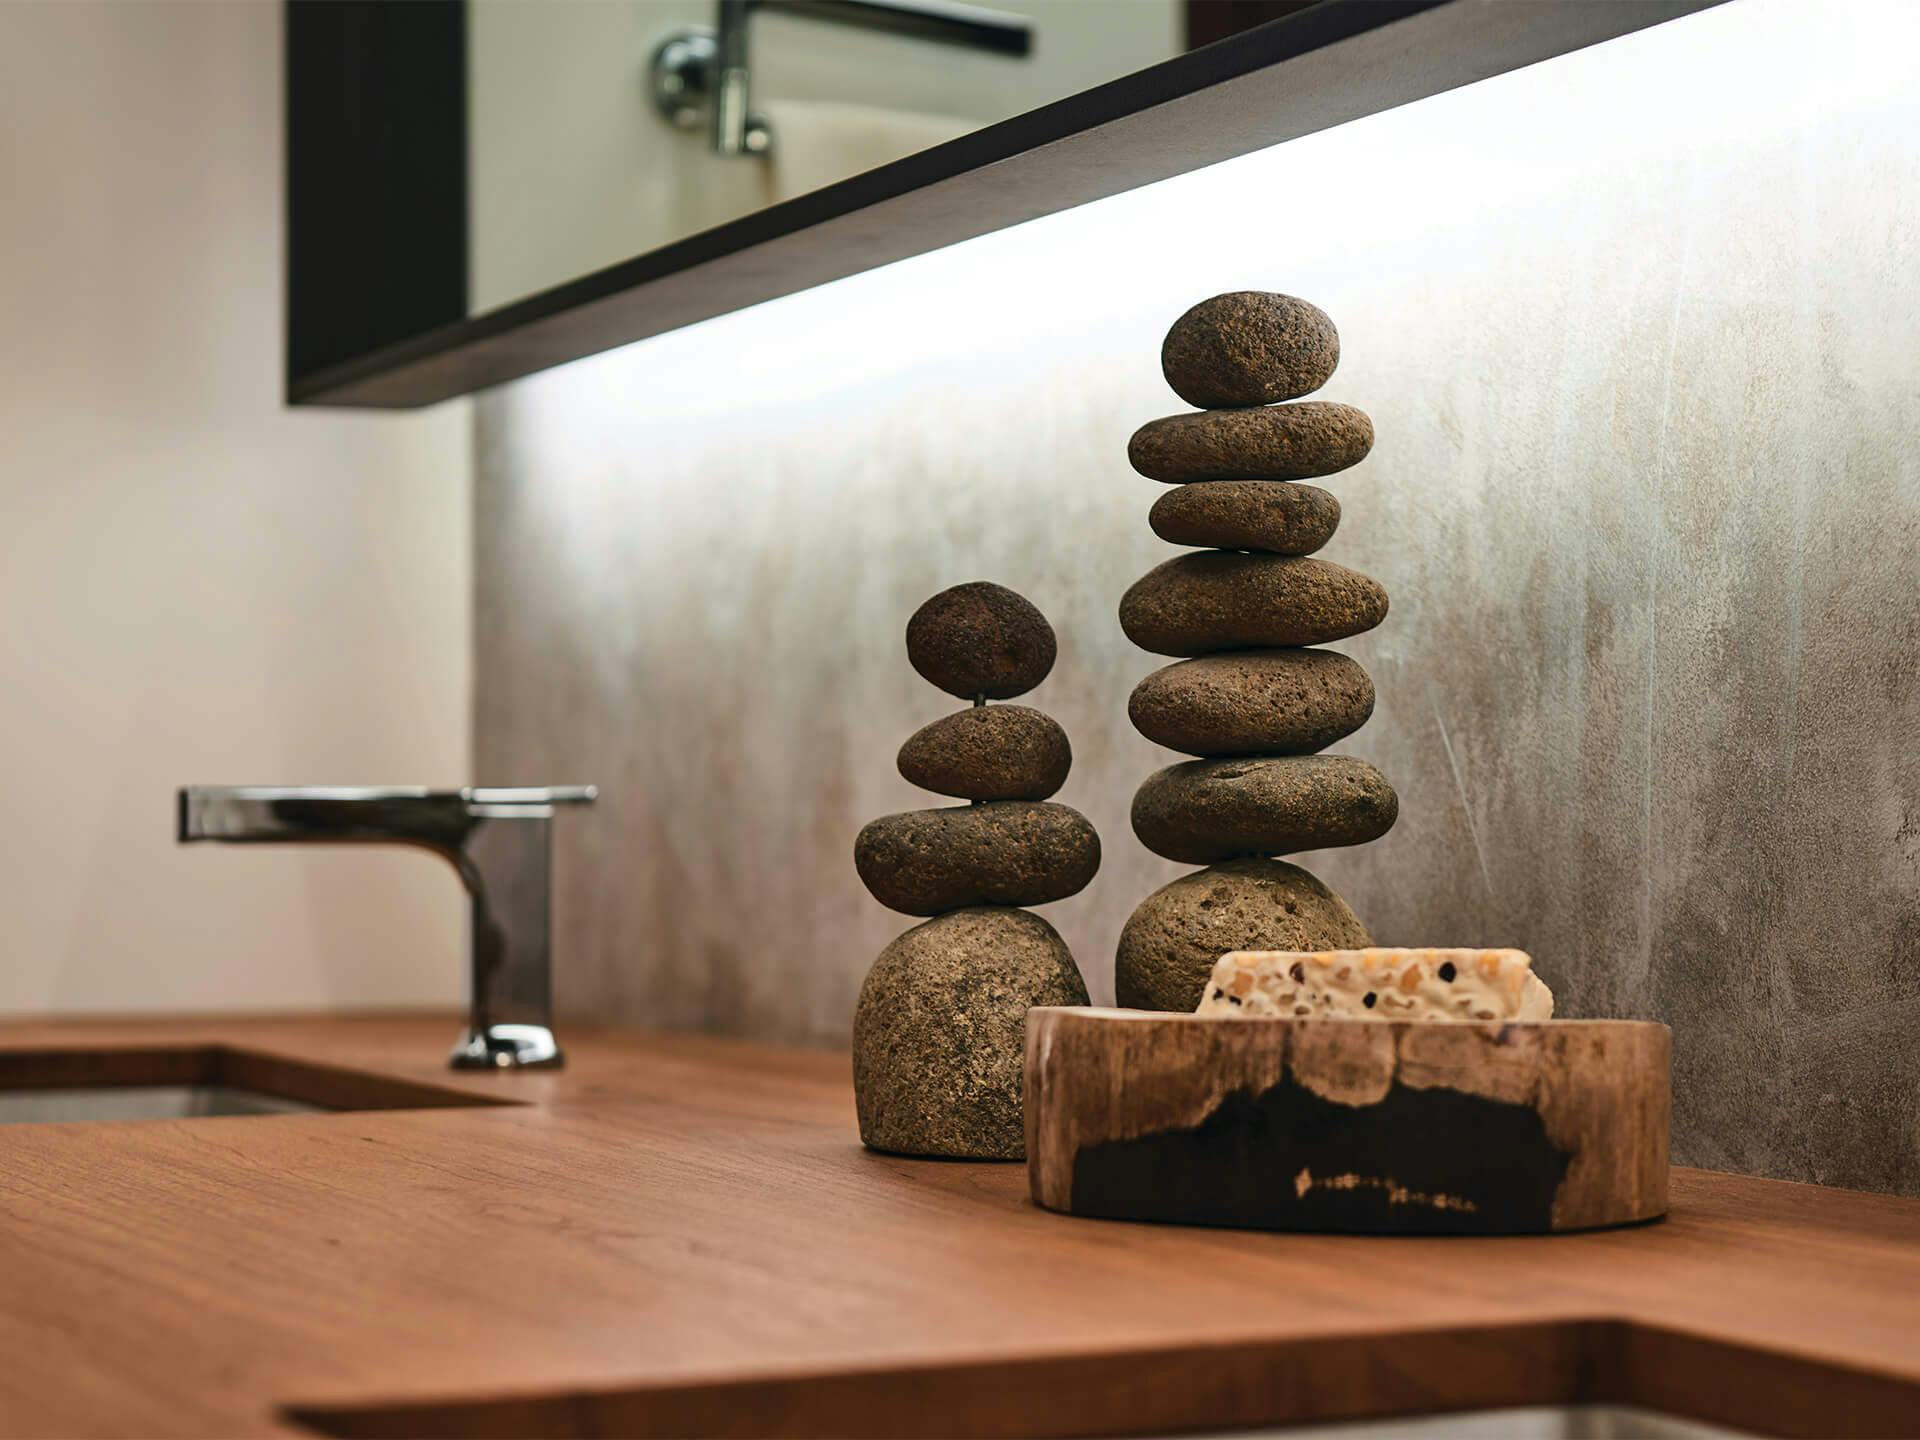 Lifestyle image of stacked stones on wooden bathroom countertop. 